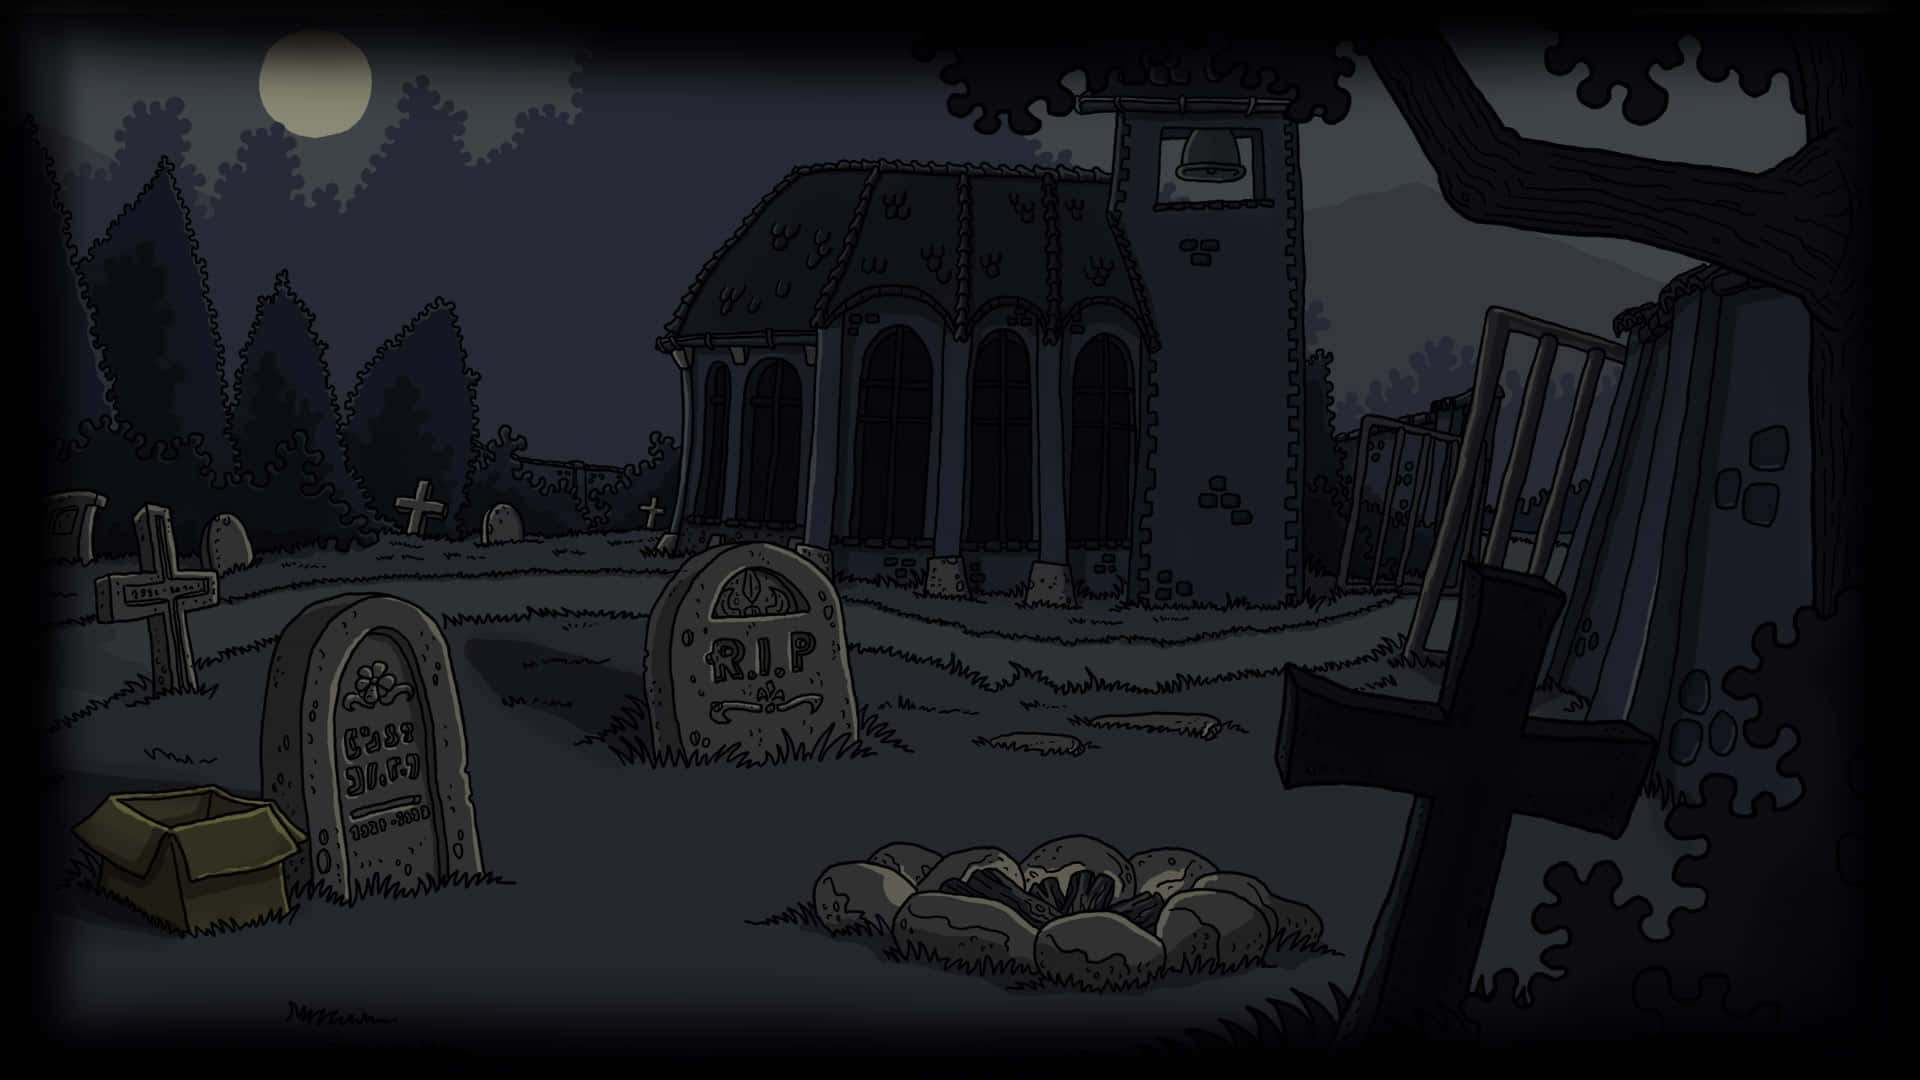 Pay a Visit to a Somber Graveyard